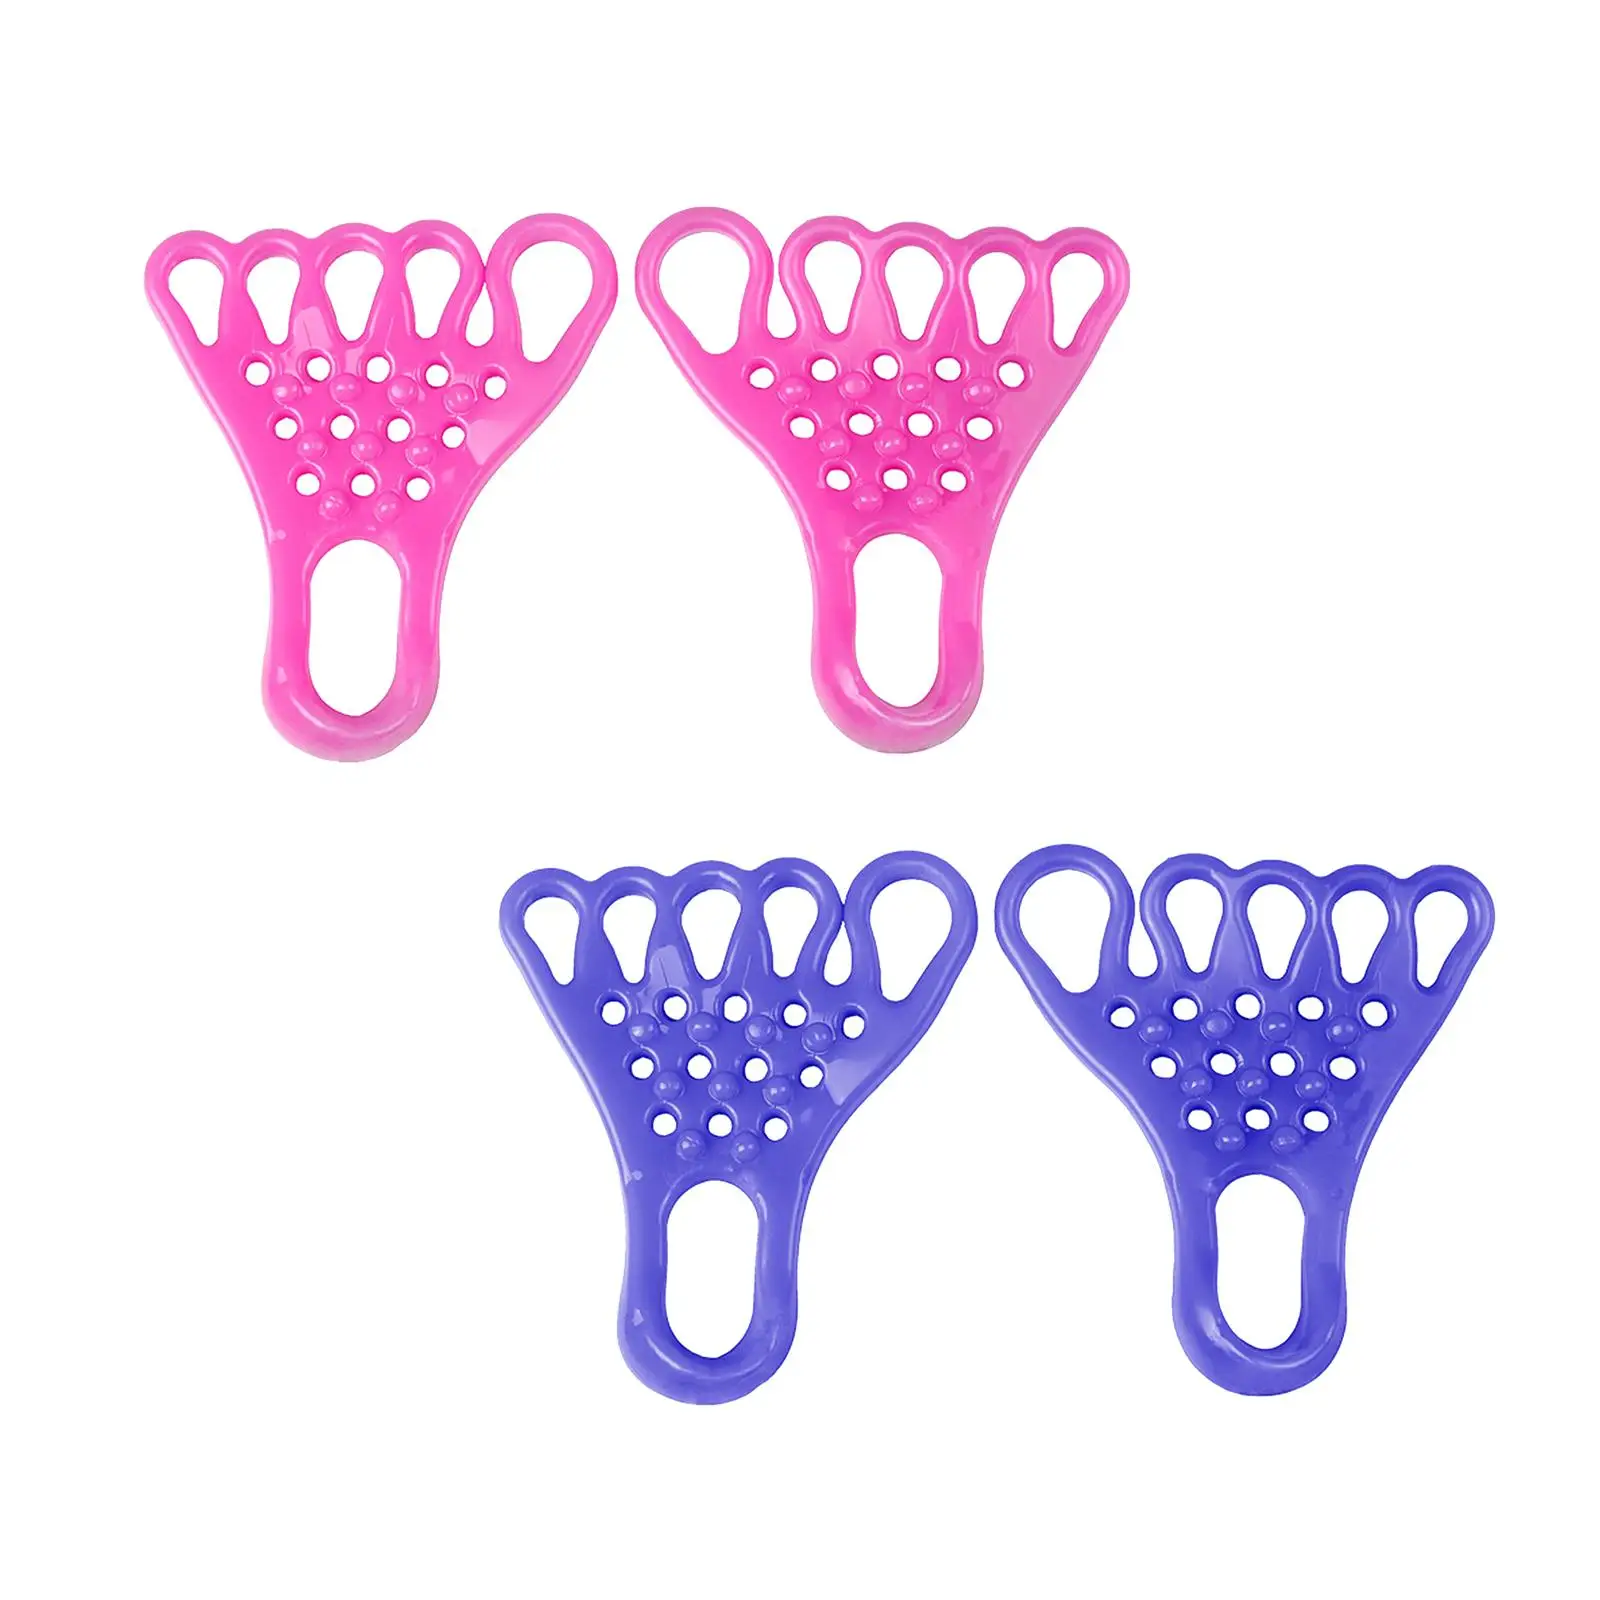 Toe Straightener Stretcher Hammer Toes for Yoga Curled Toes Women Men